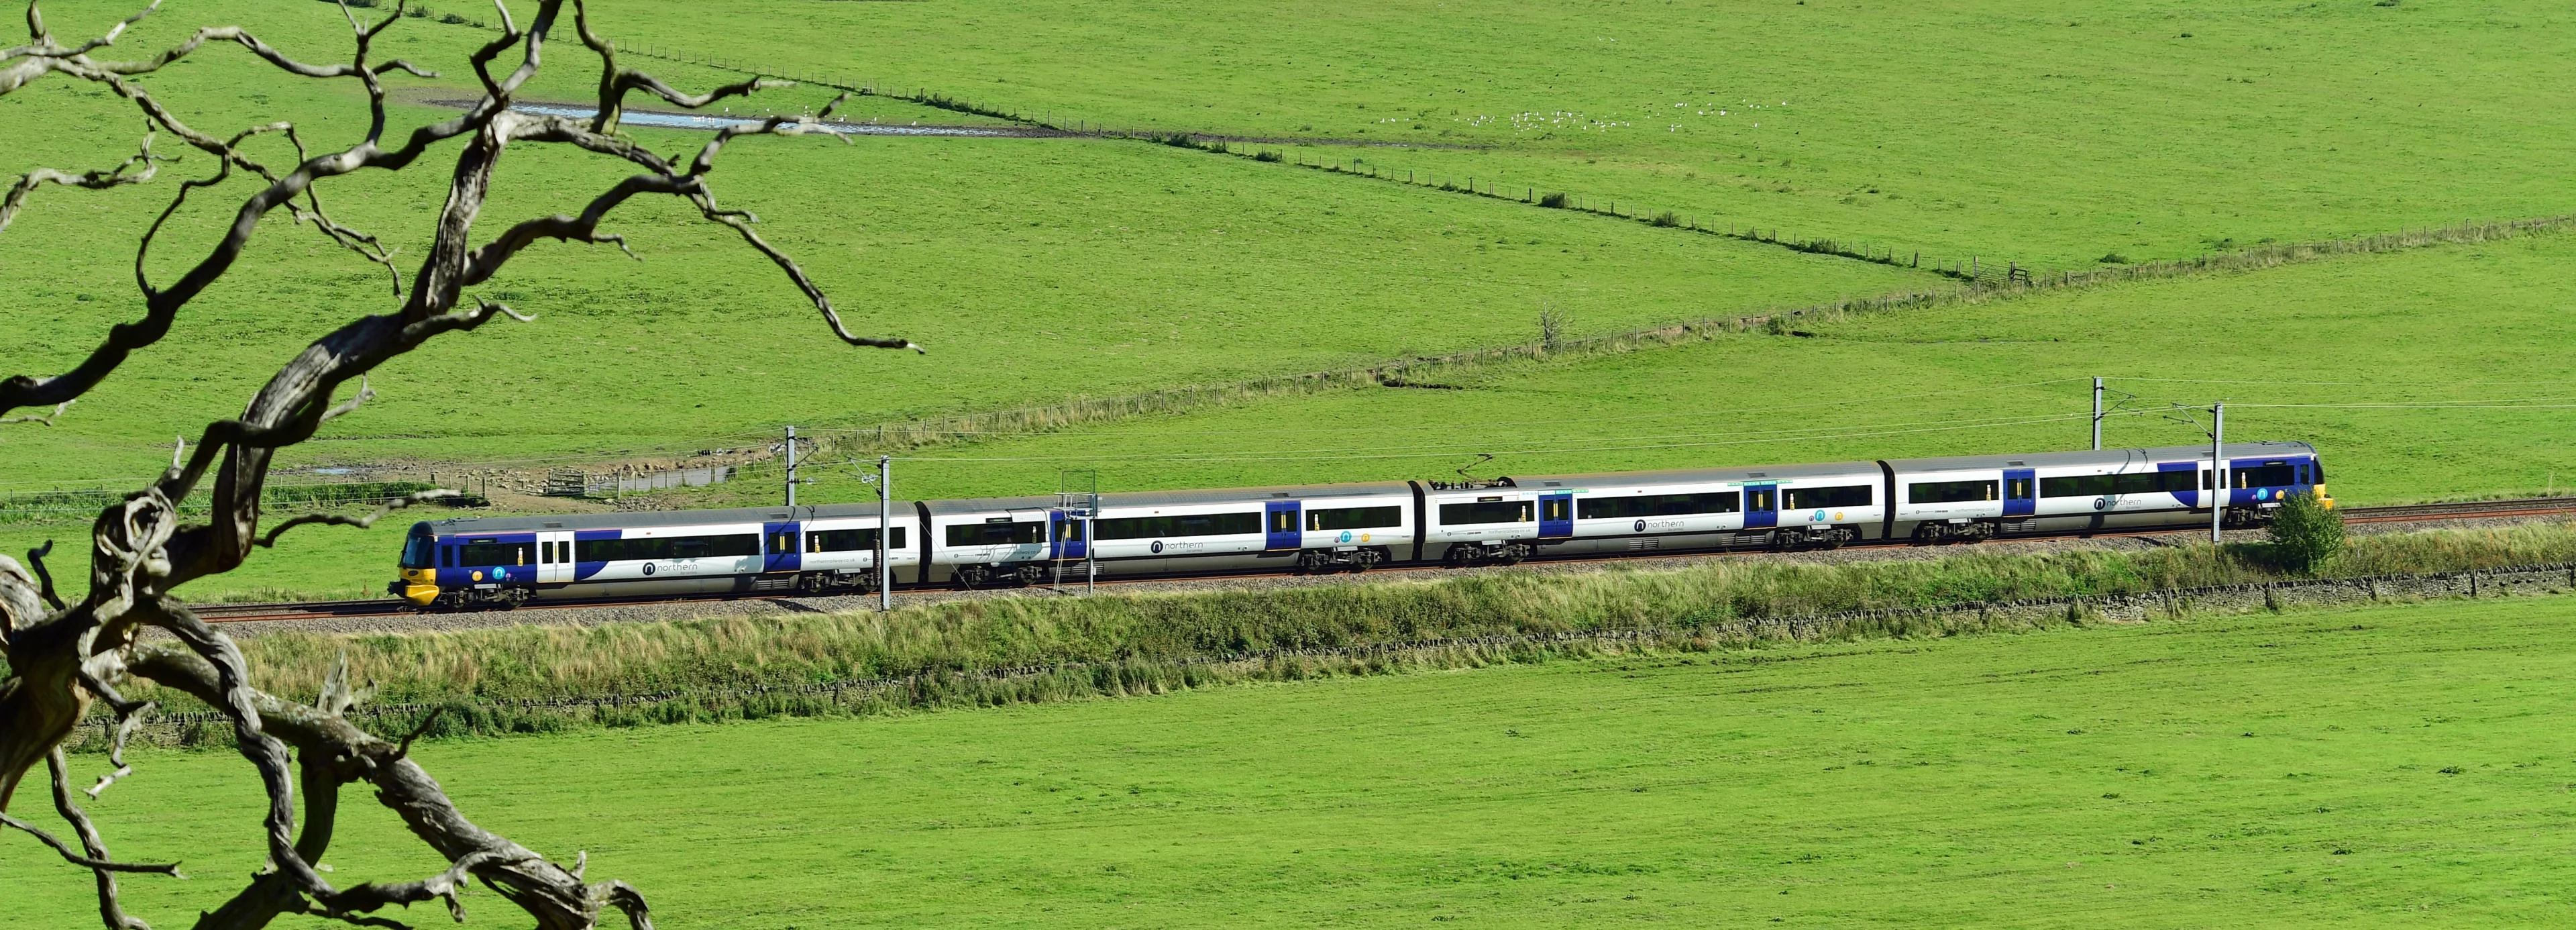 A train crossing through a green field on a sunny day